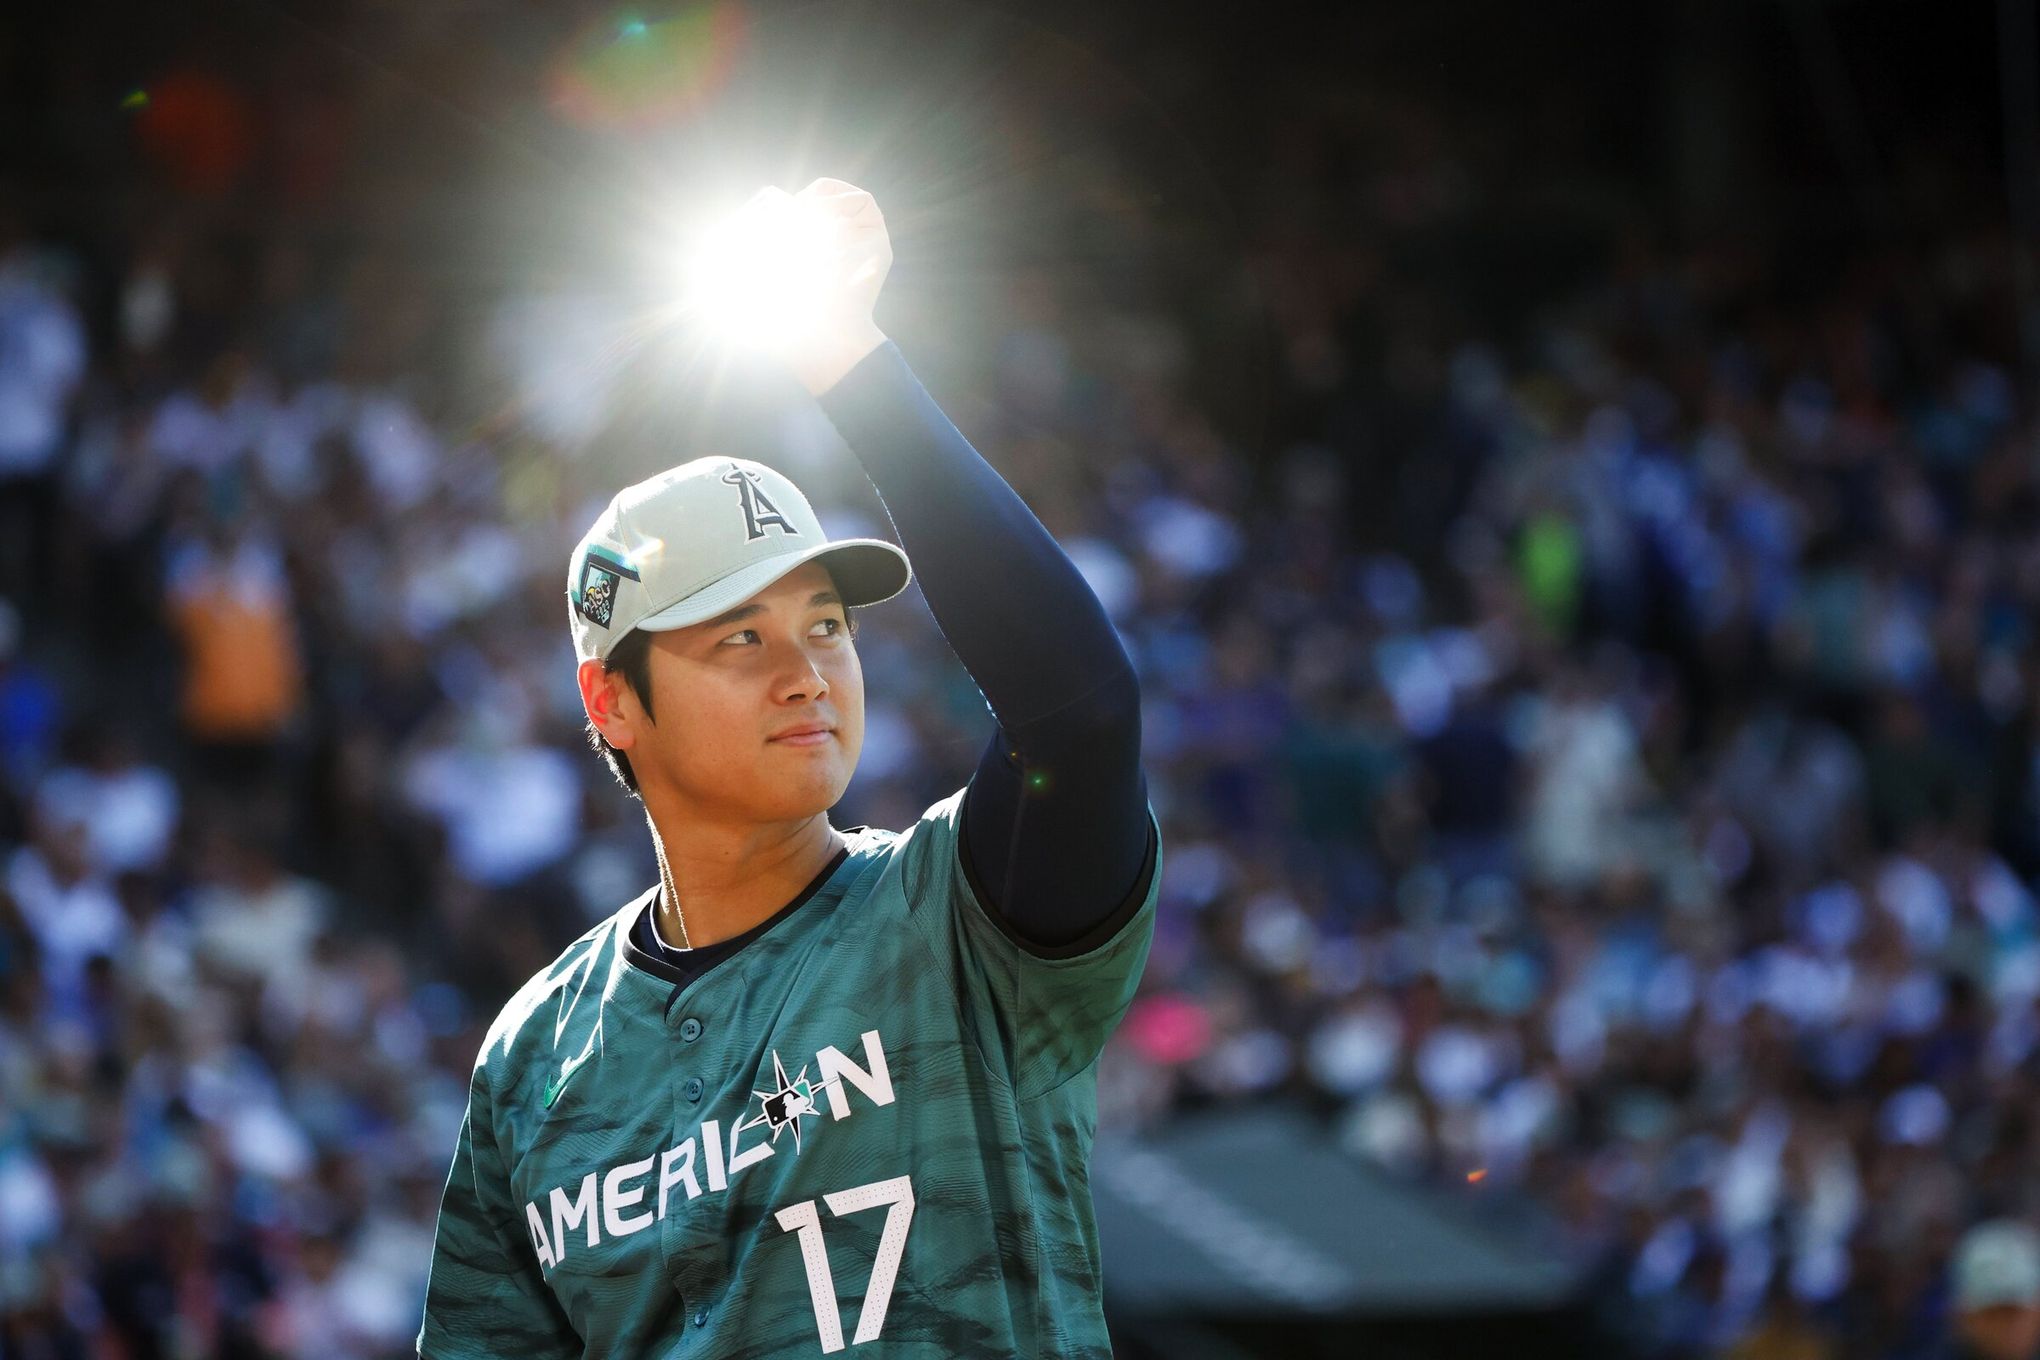 Angels Must Revisit a Shohei Ohtani Trade in the Offseason